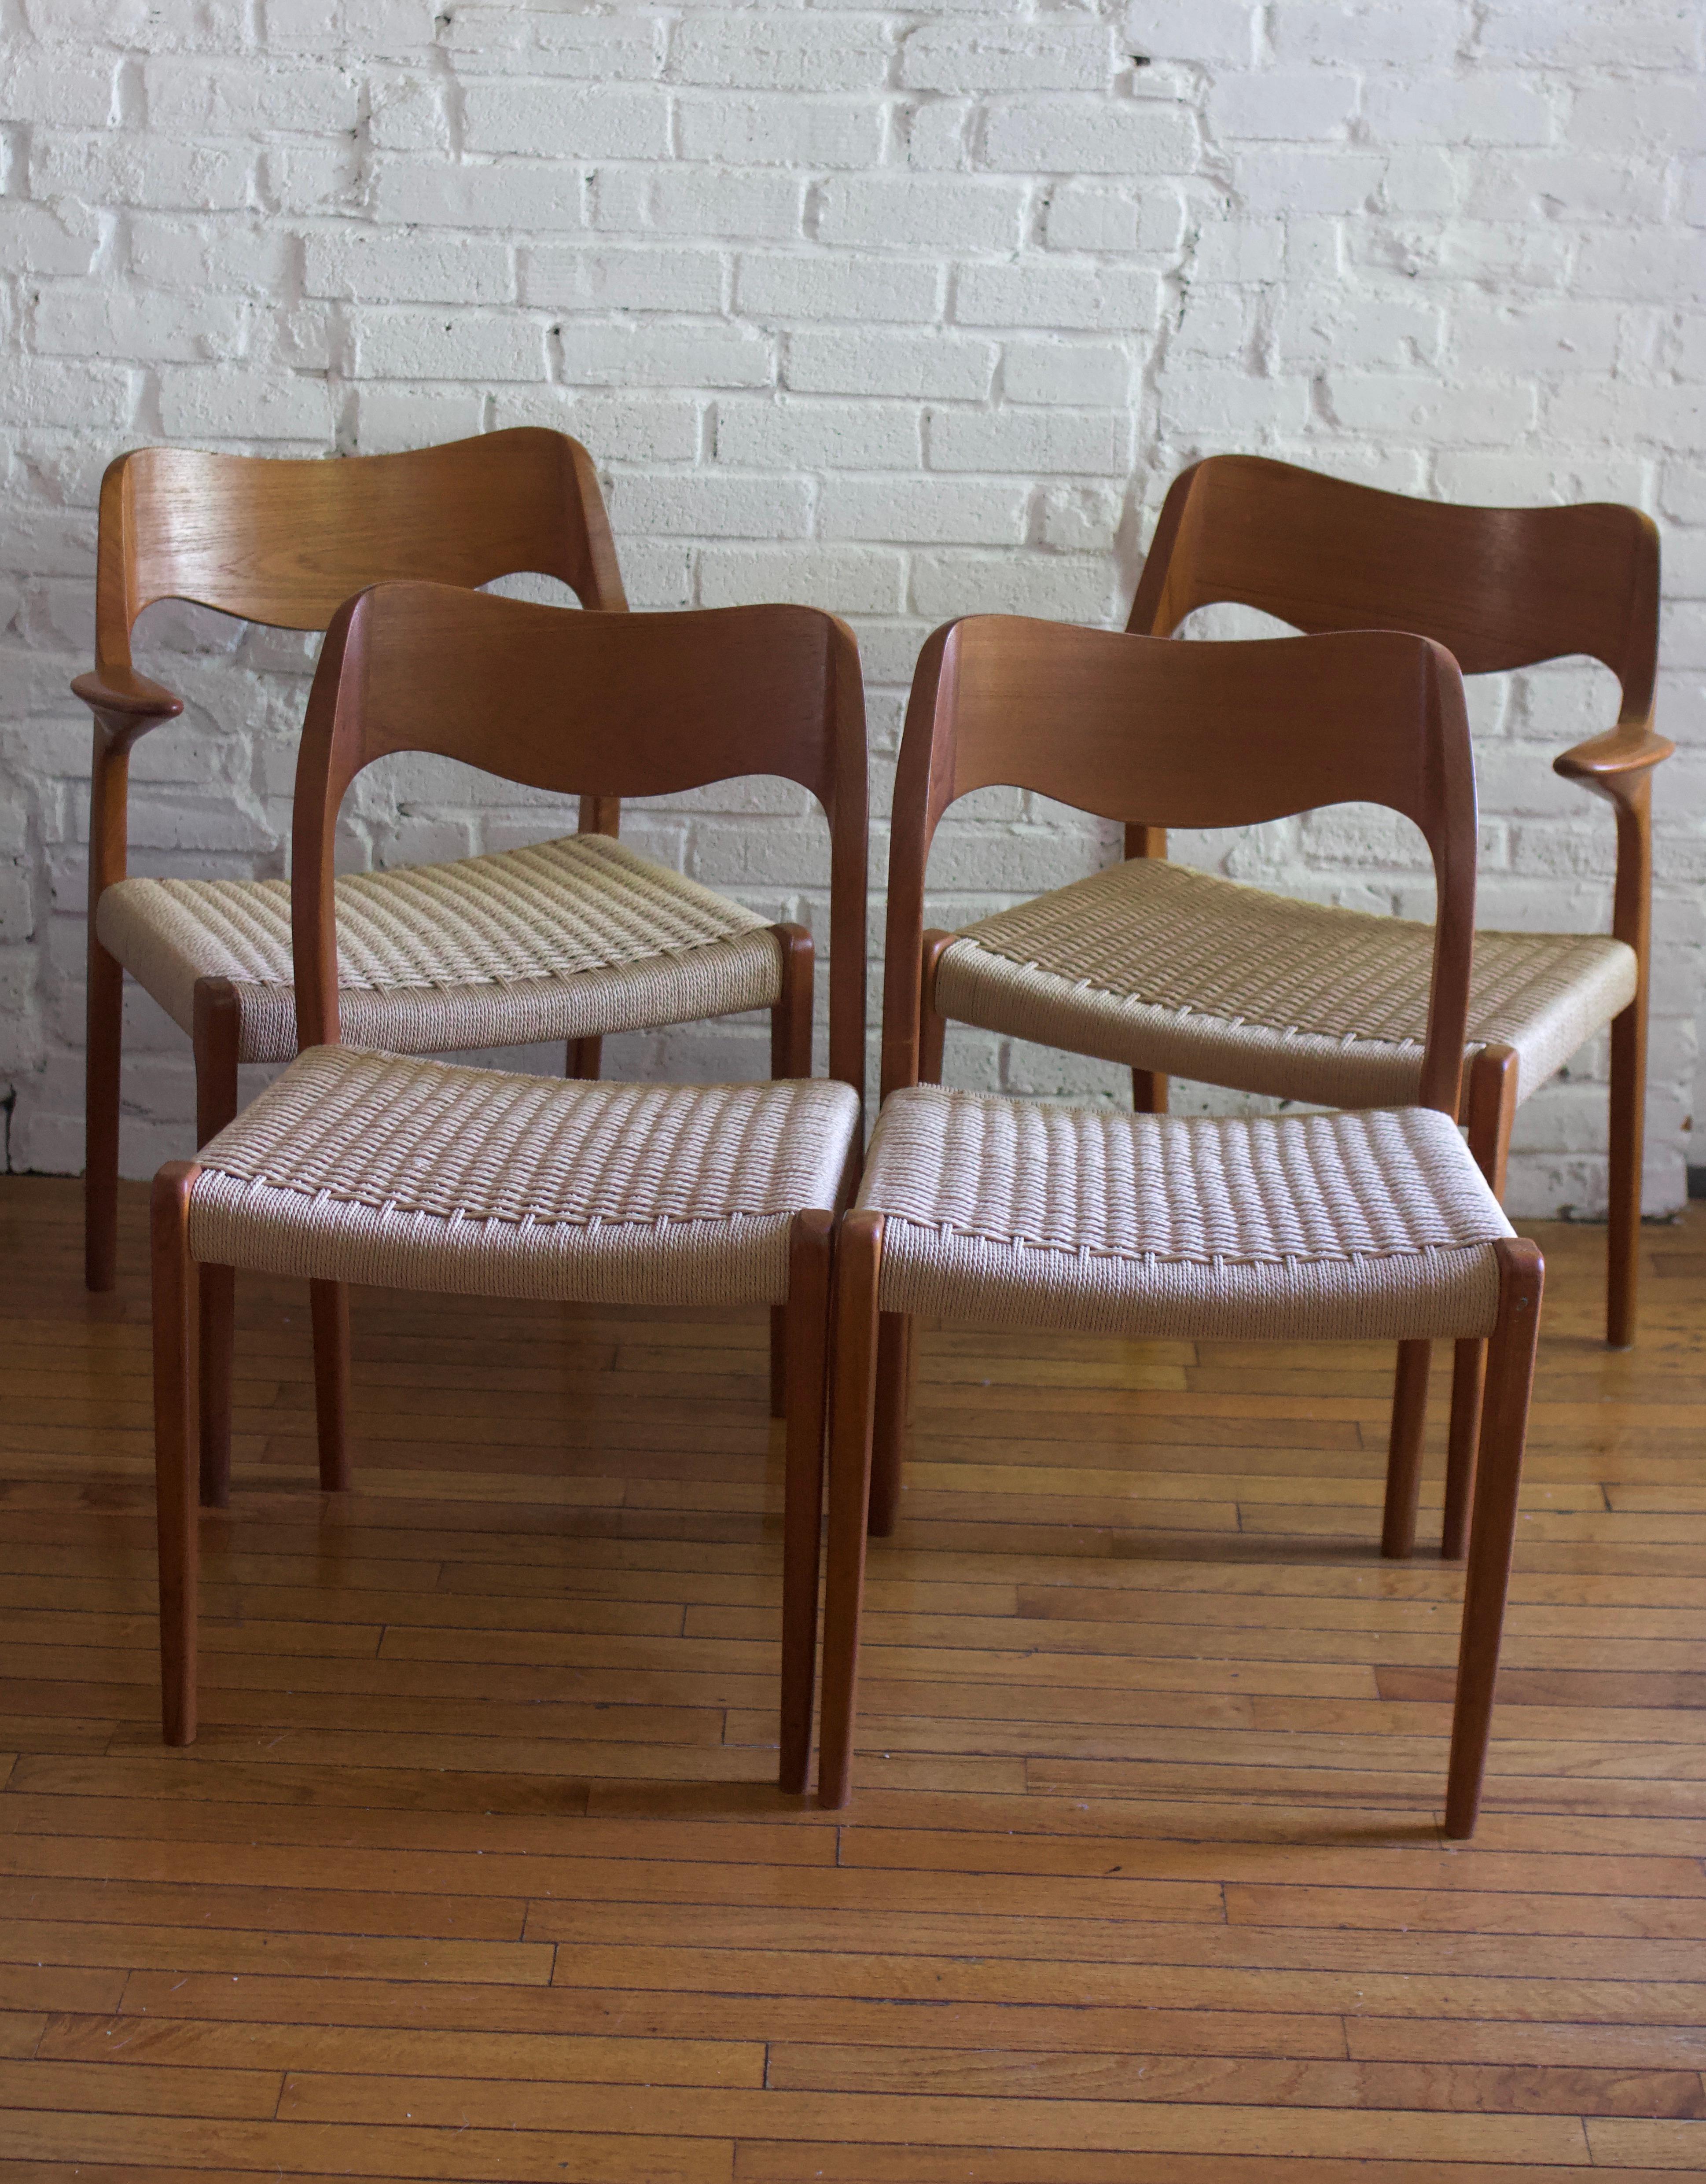 Fantastic pair of Niels O. Møller Model 71 chairs dining chairs. Sculptural hardwood teak frame and Danish cord seats. New Danish cord was just completed. 

Made in Denmark and designed in 1951 by famed 20th century Danish designer Niels Otto